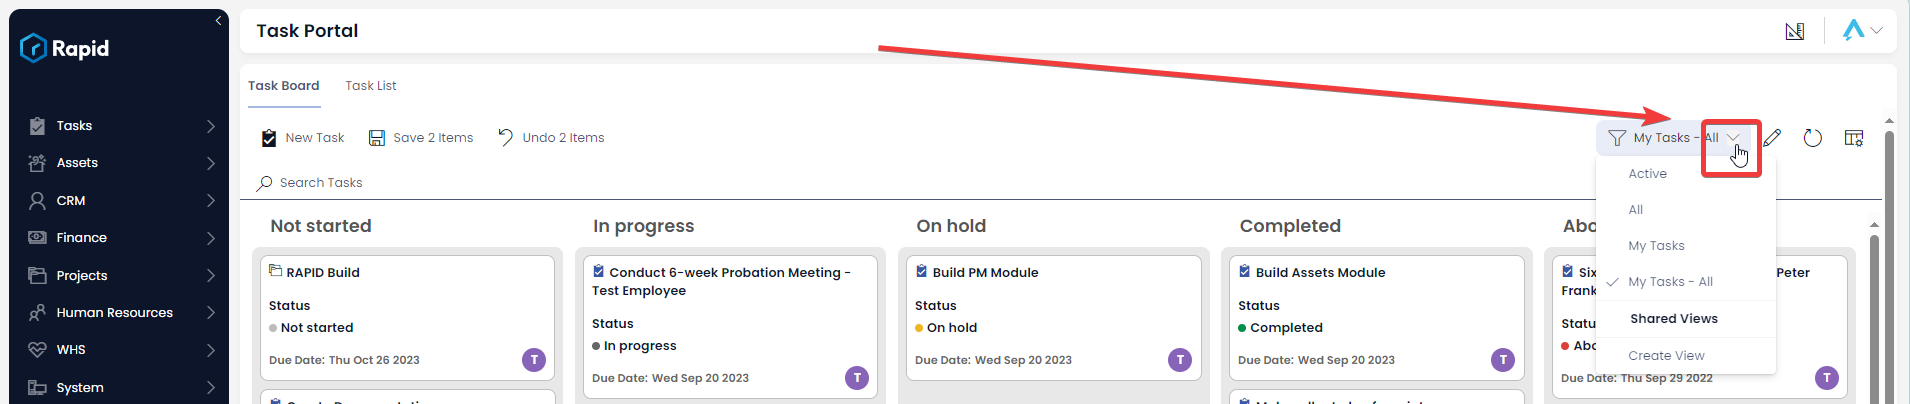 A screenshot demonstrating the location of the Task Board view button. This is a drop-down menu button that will open a series of other views to choose from, as well as an option at the bottom that reads &quot;Create View&quot;. In this example, the button has the title &quot;My Tasks - All&quot;, as this is the current view selected. The button also has an icon of a filter. The screenshot is annotated with a red arrow and red box to highlight the location of the view button.